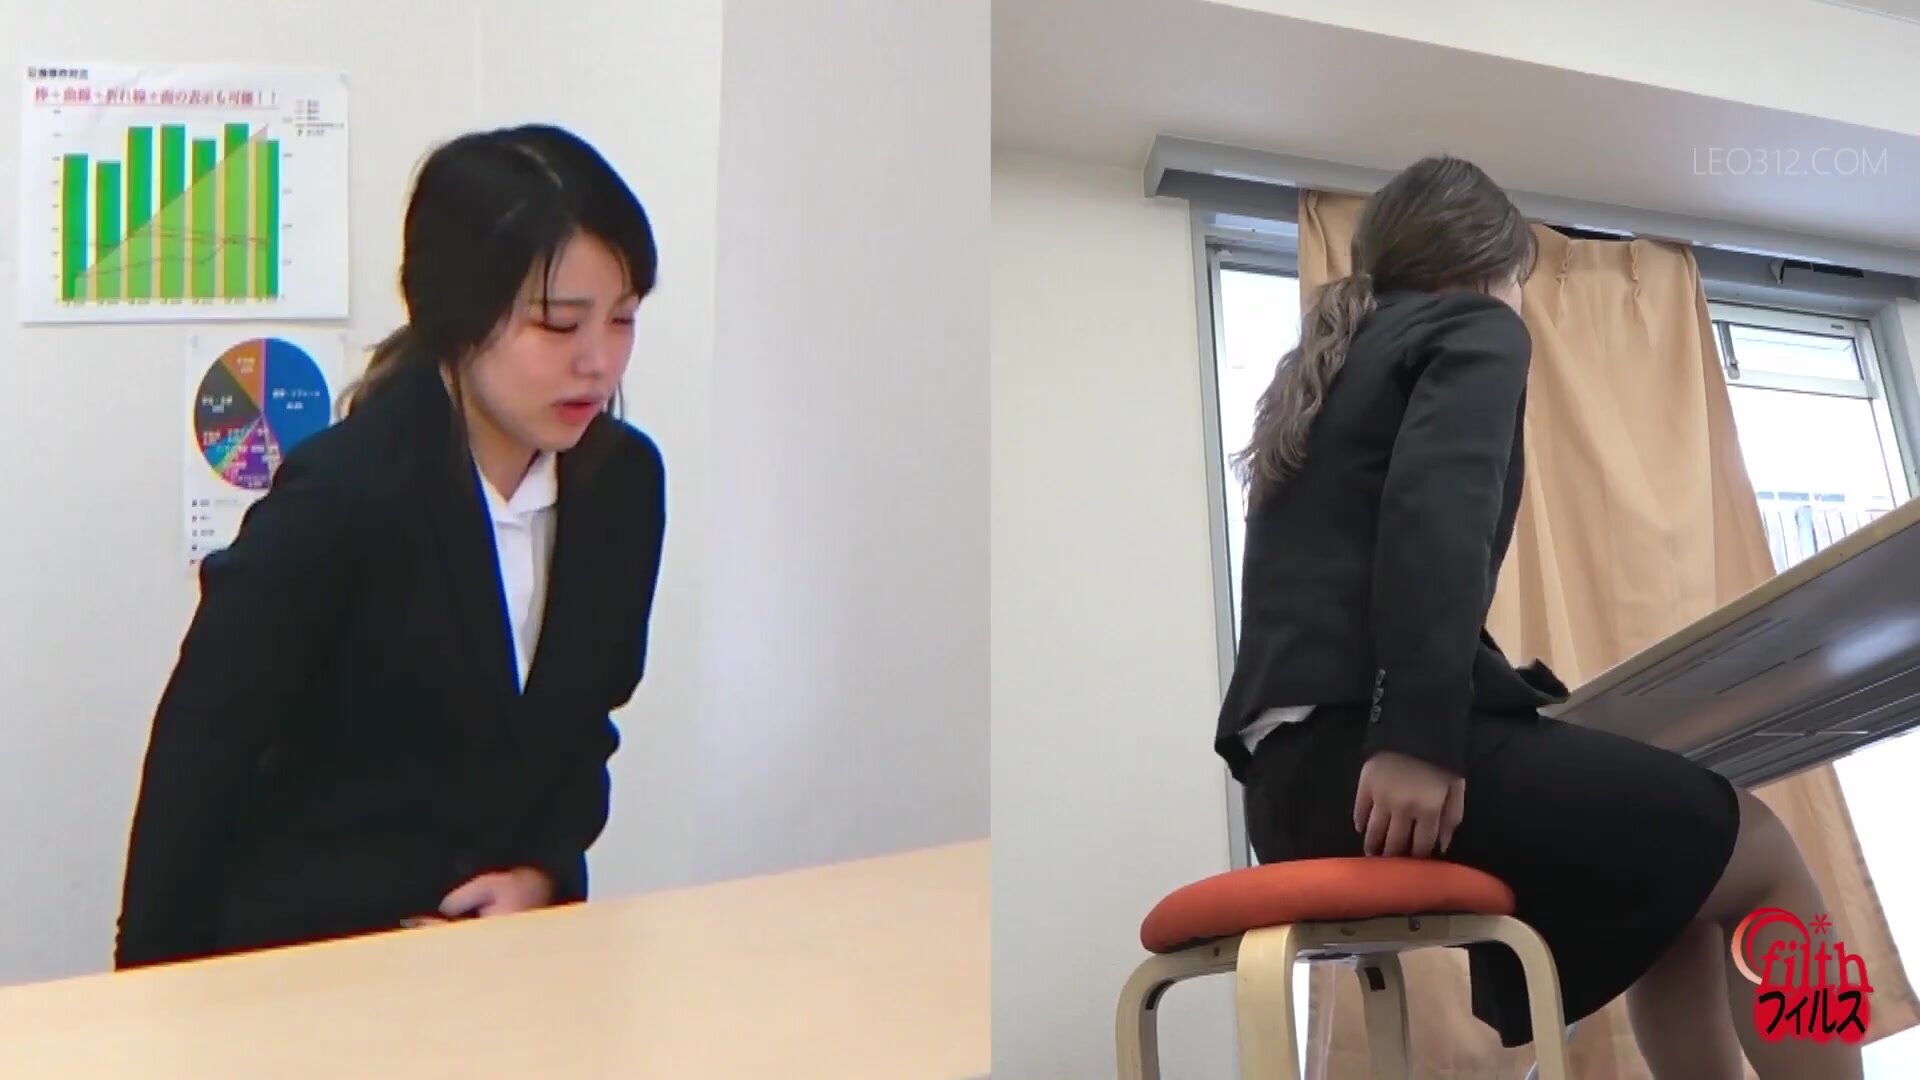 Japanese girl farts while interview 2